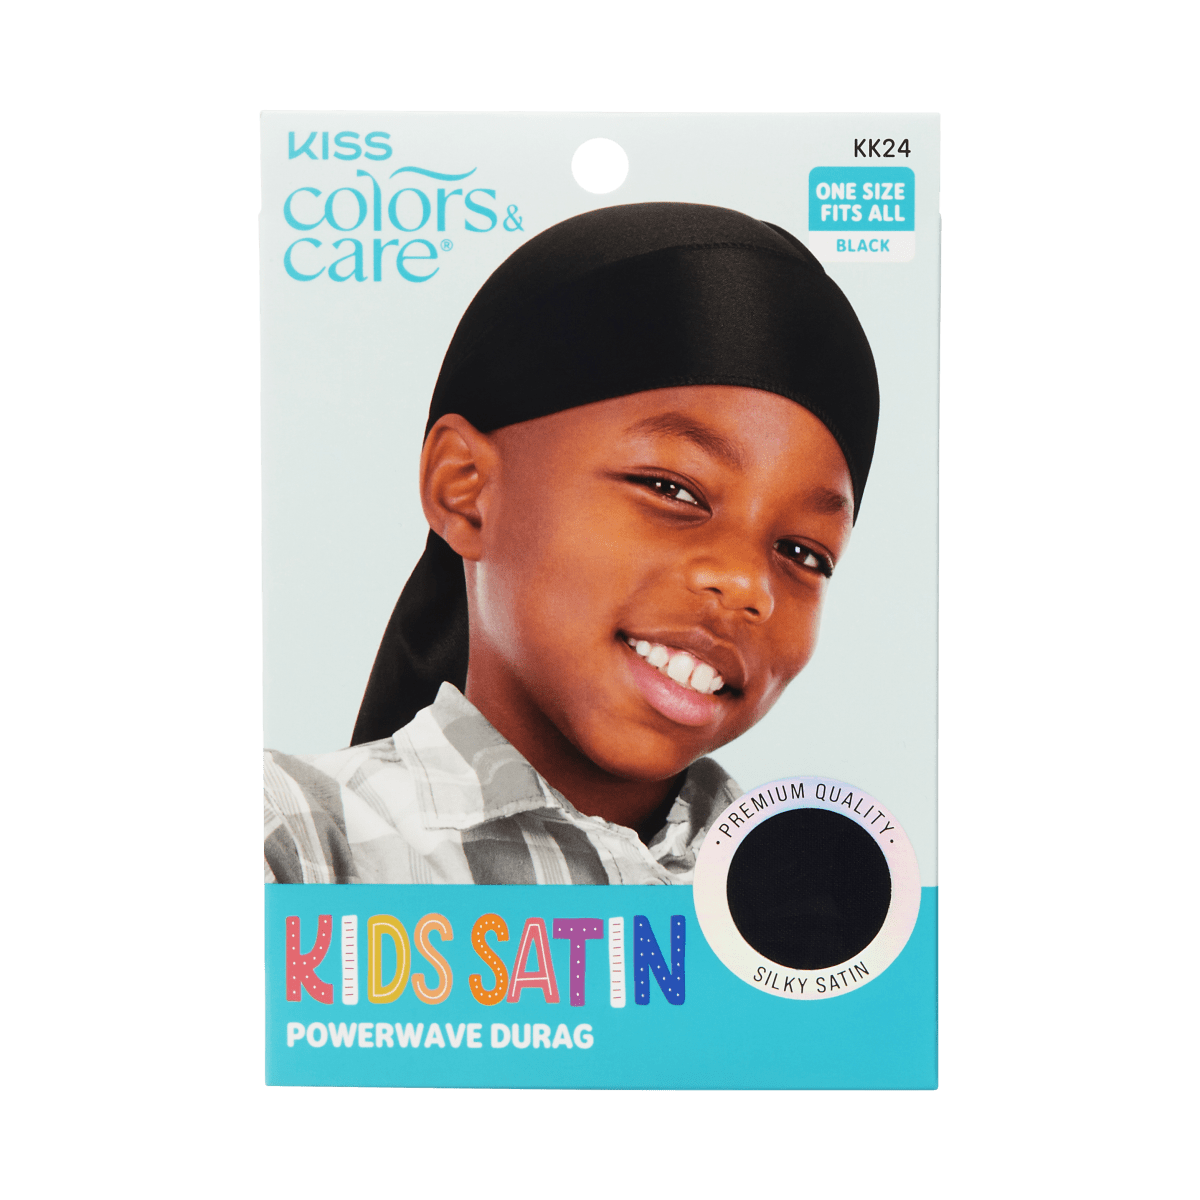 360 Waves: The Most Stylish Designer Durags for Silky Waves